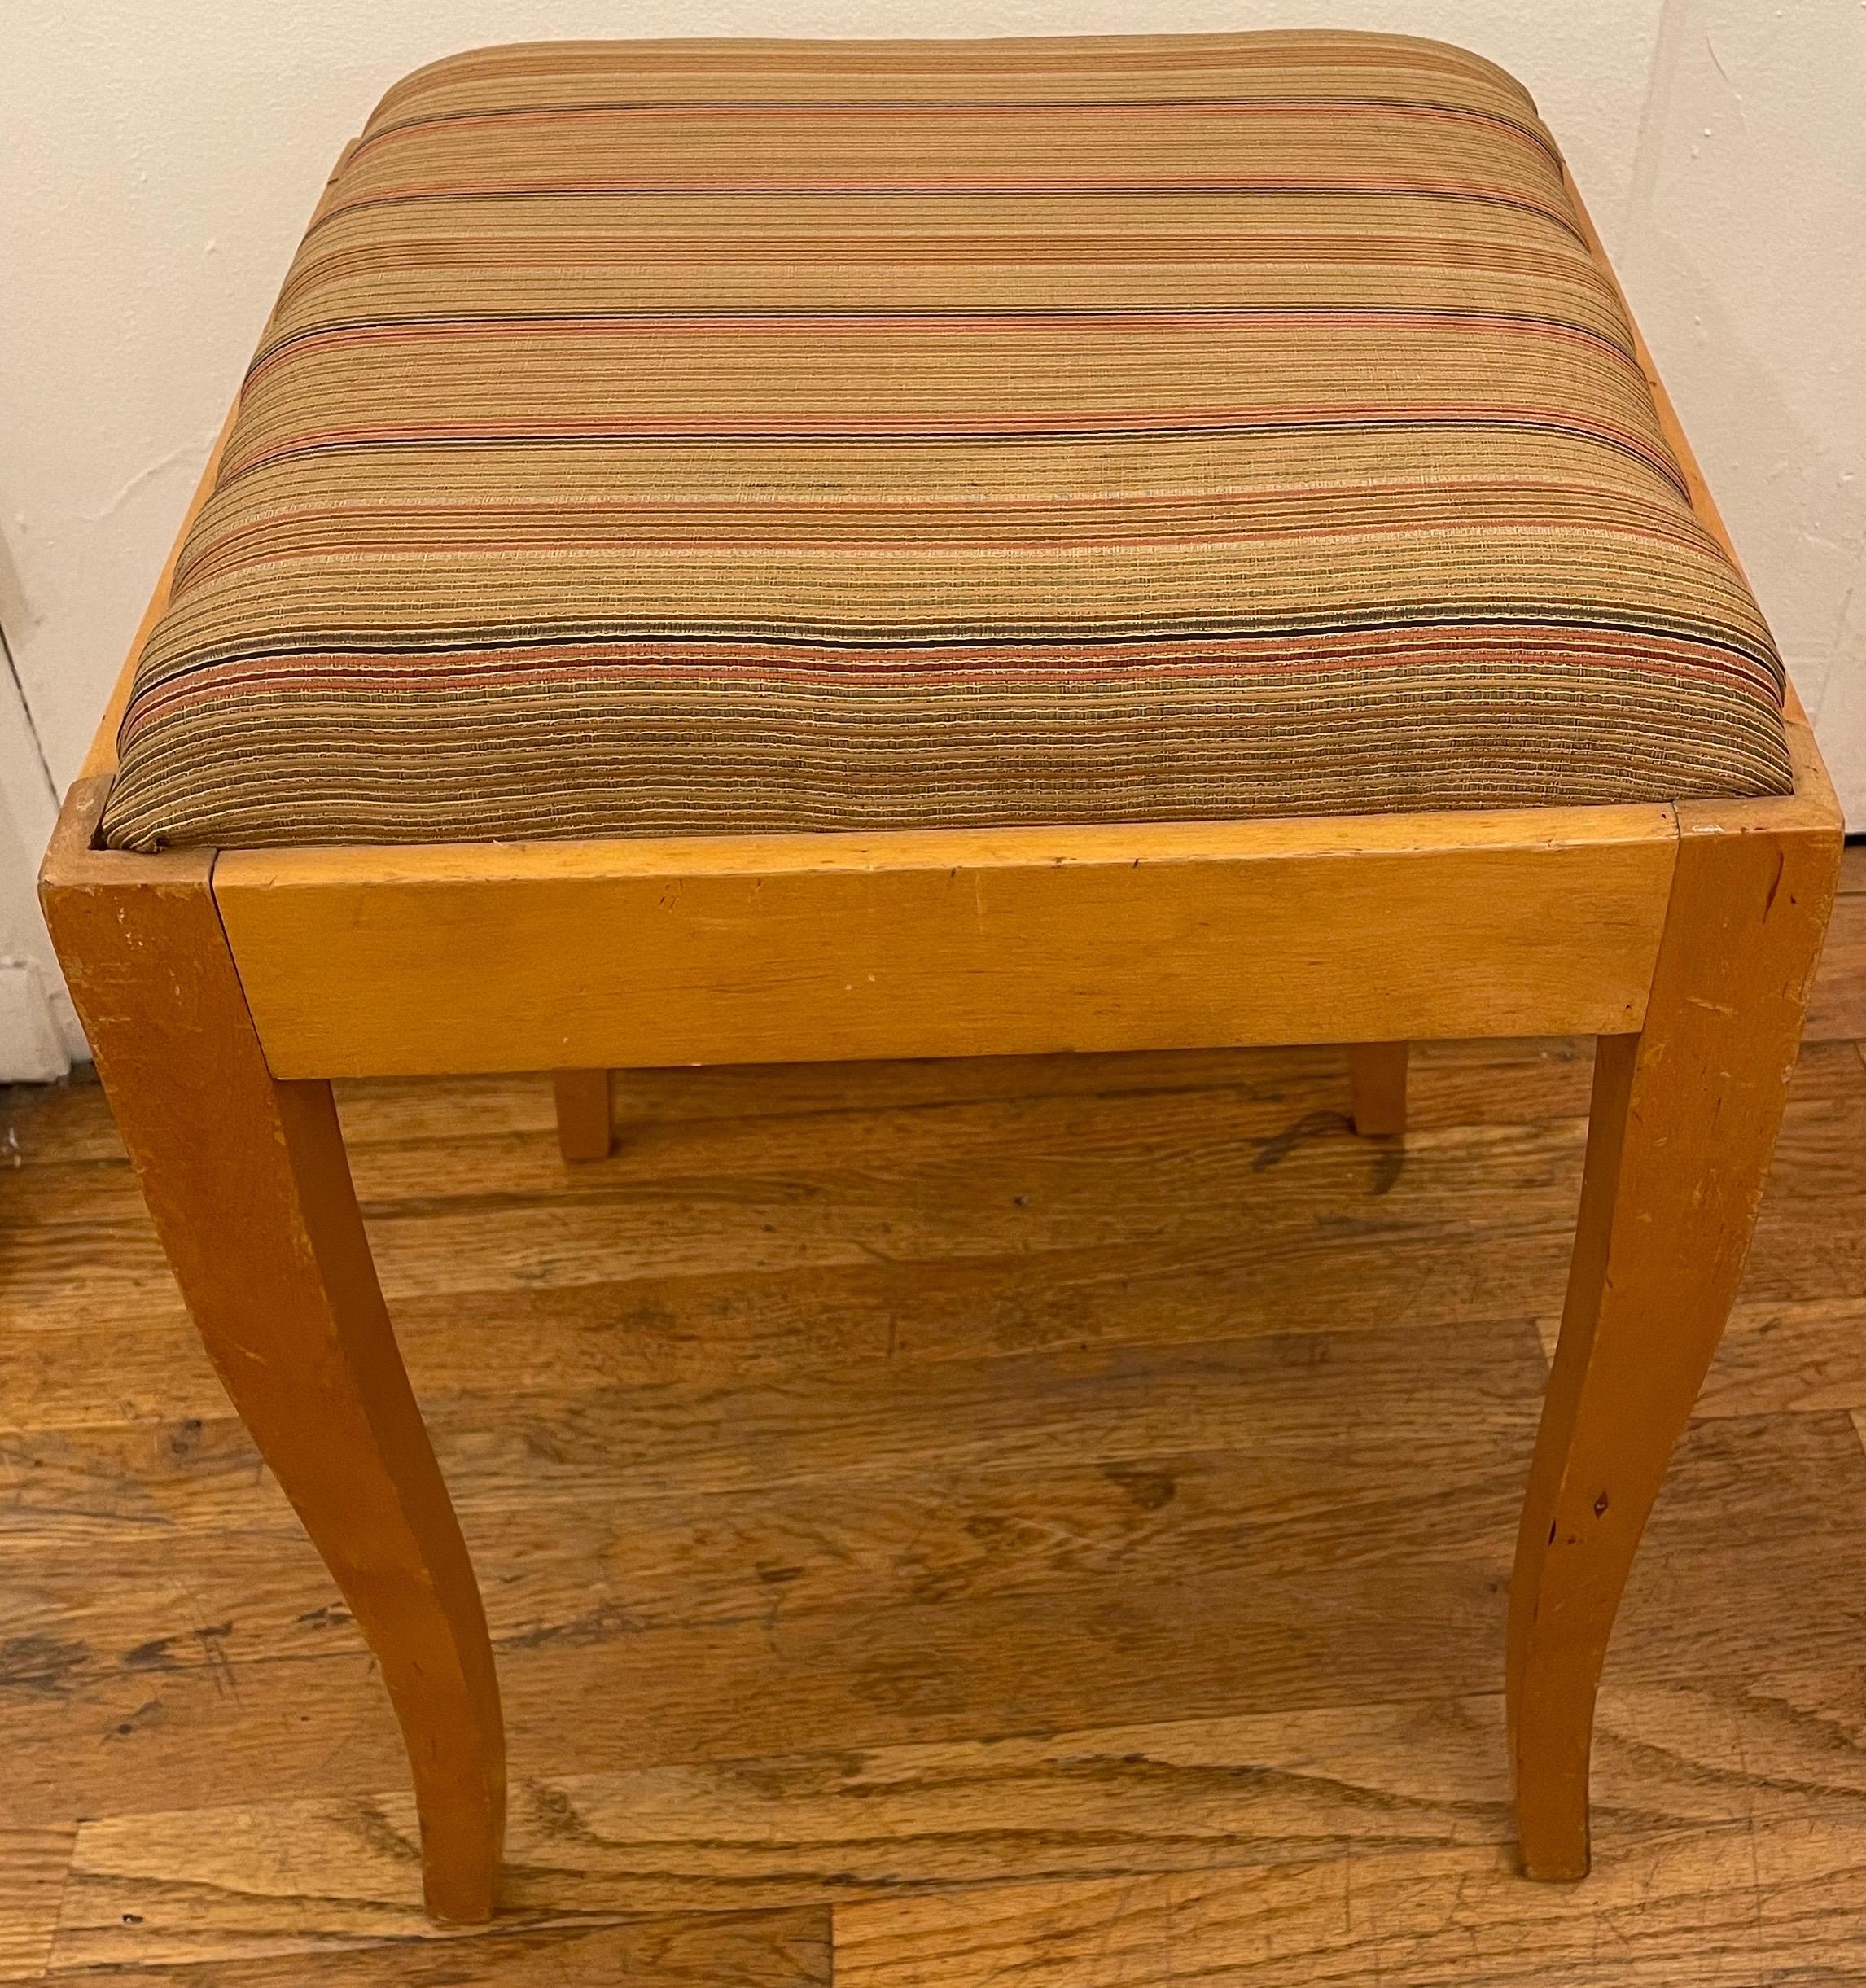 This freshly reupholstered stool is adorned with golden silk/wool in traditional Biedermeier style.